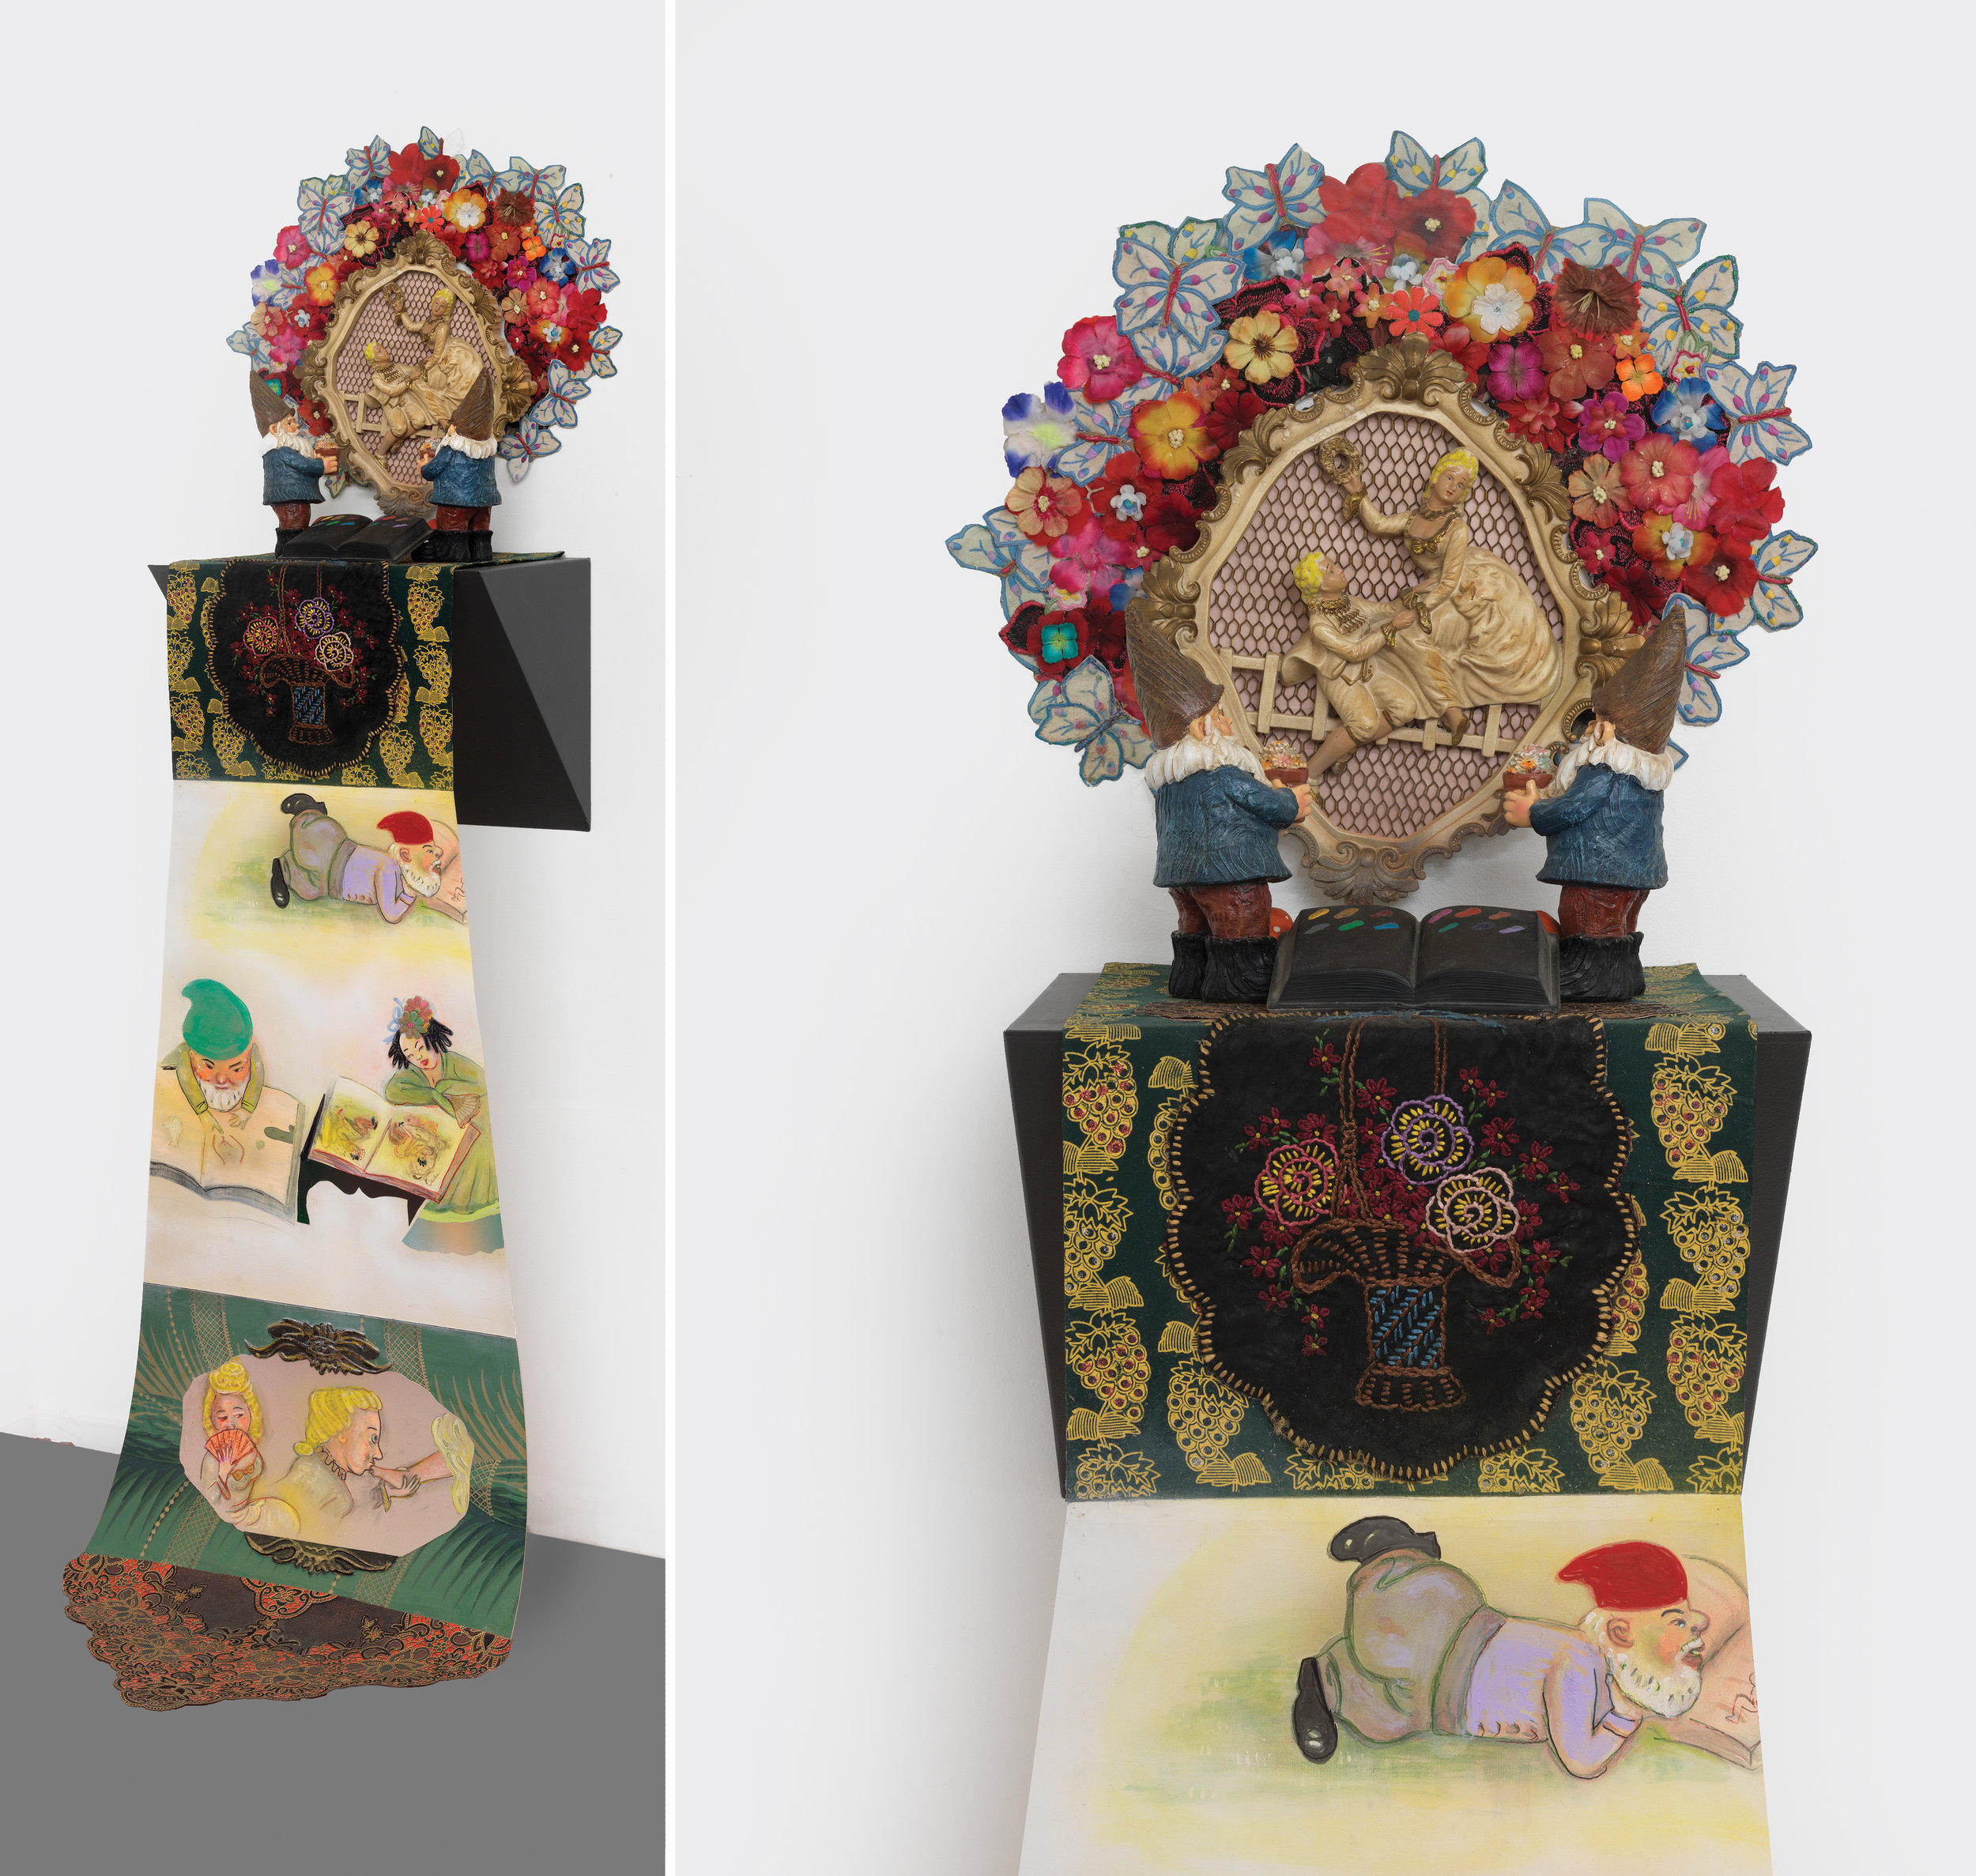 Stories Before Bedtimes (tales of love), sculpture/objects: 21" × 21" × 12" Scroll: 53" × 21", mixed media, 2015